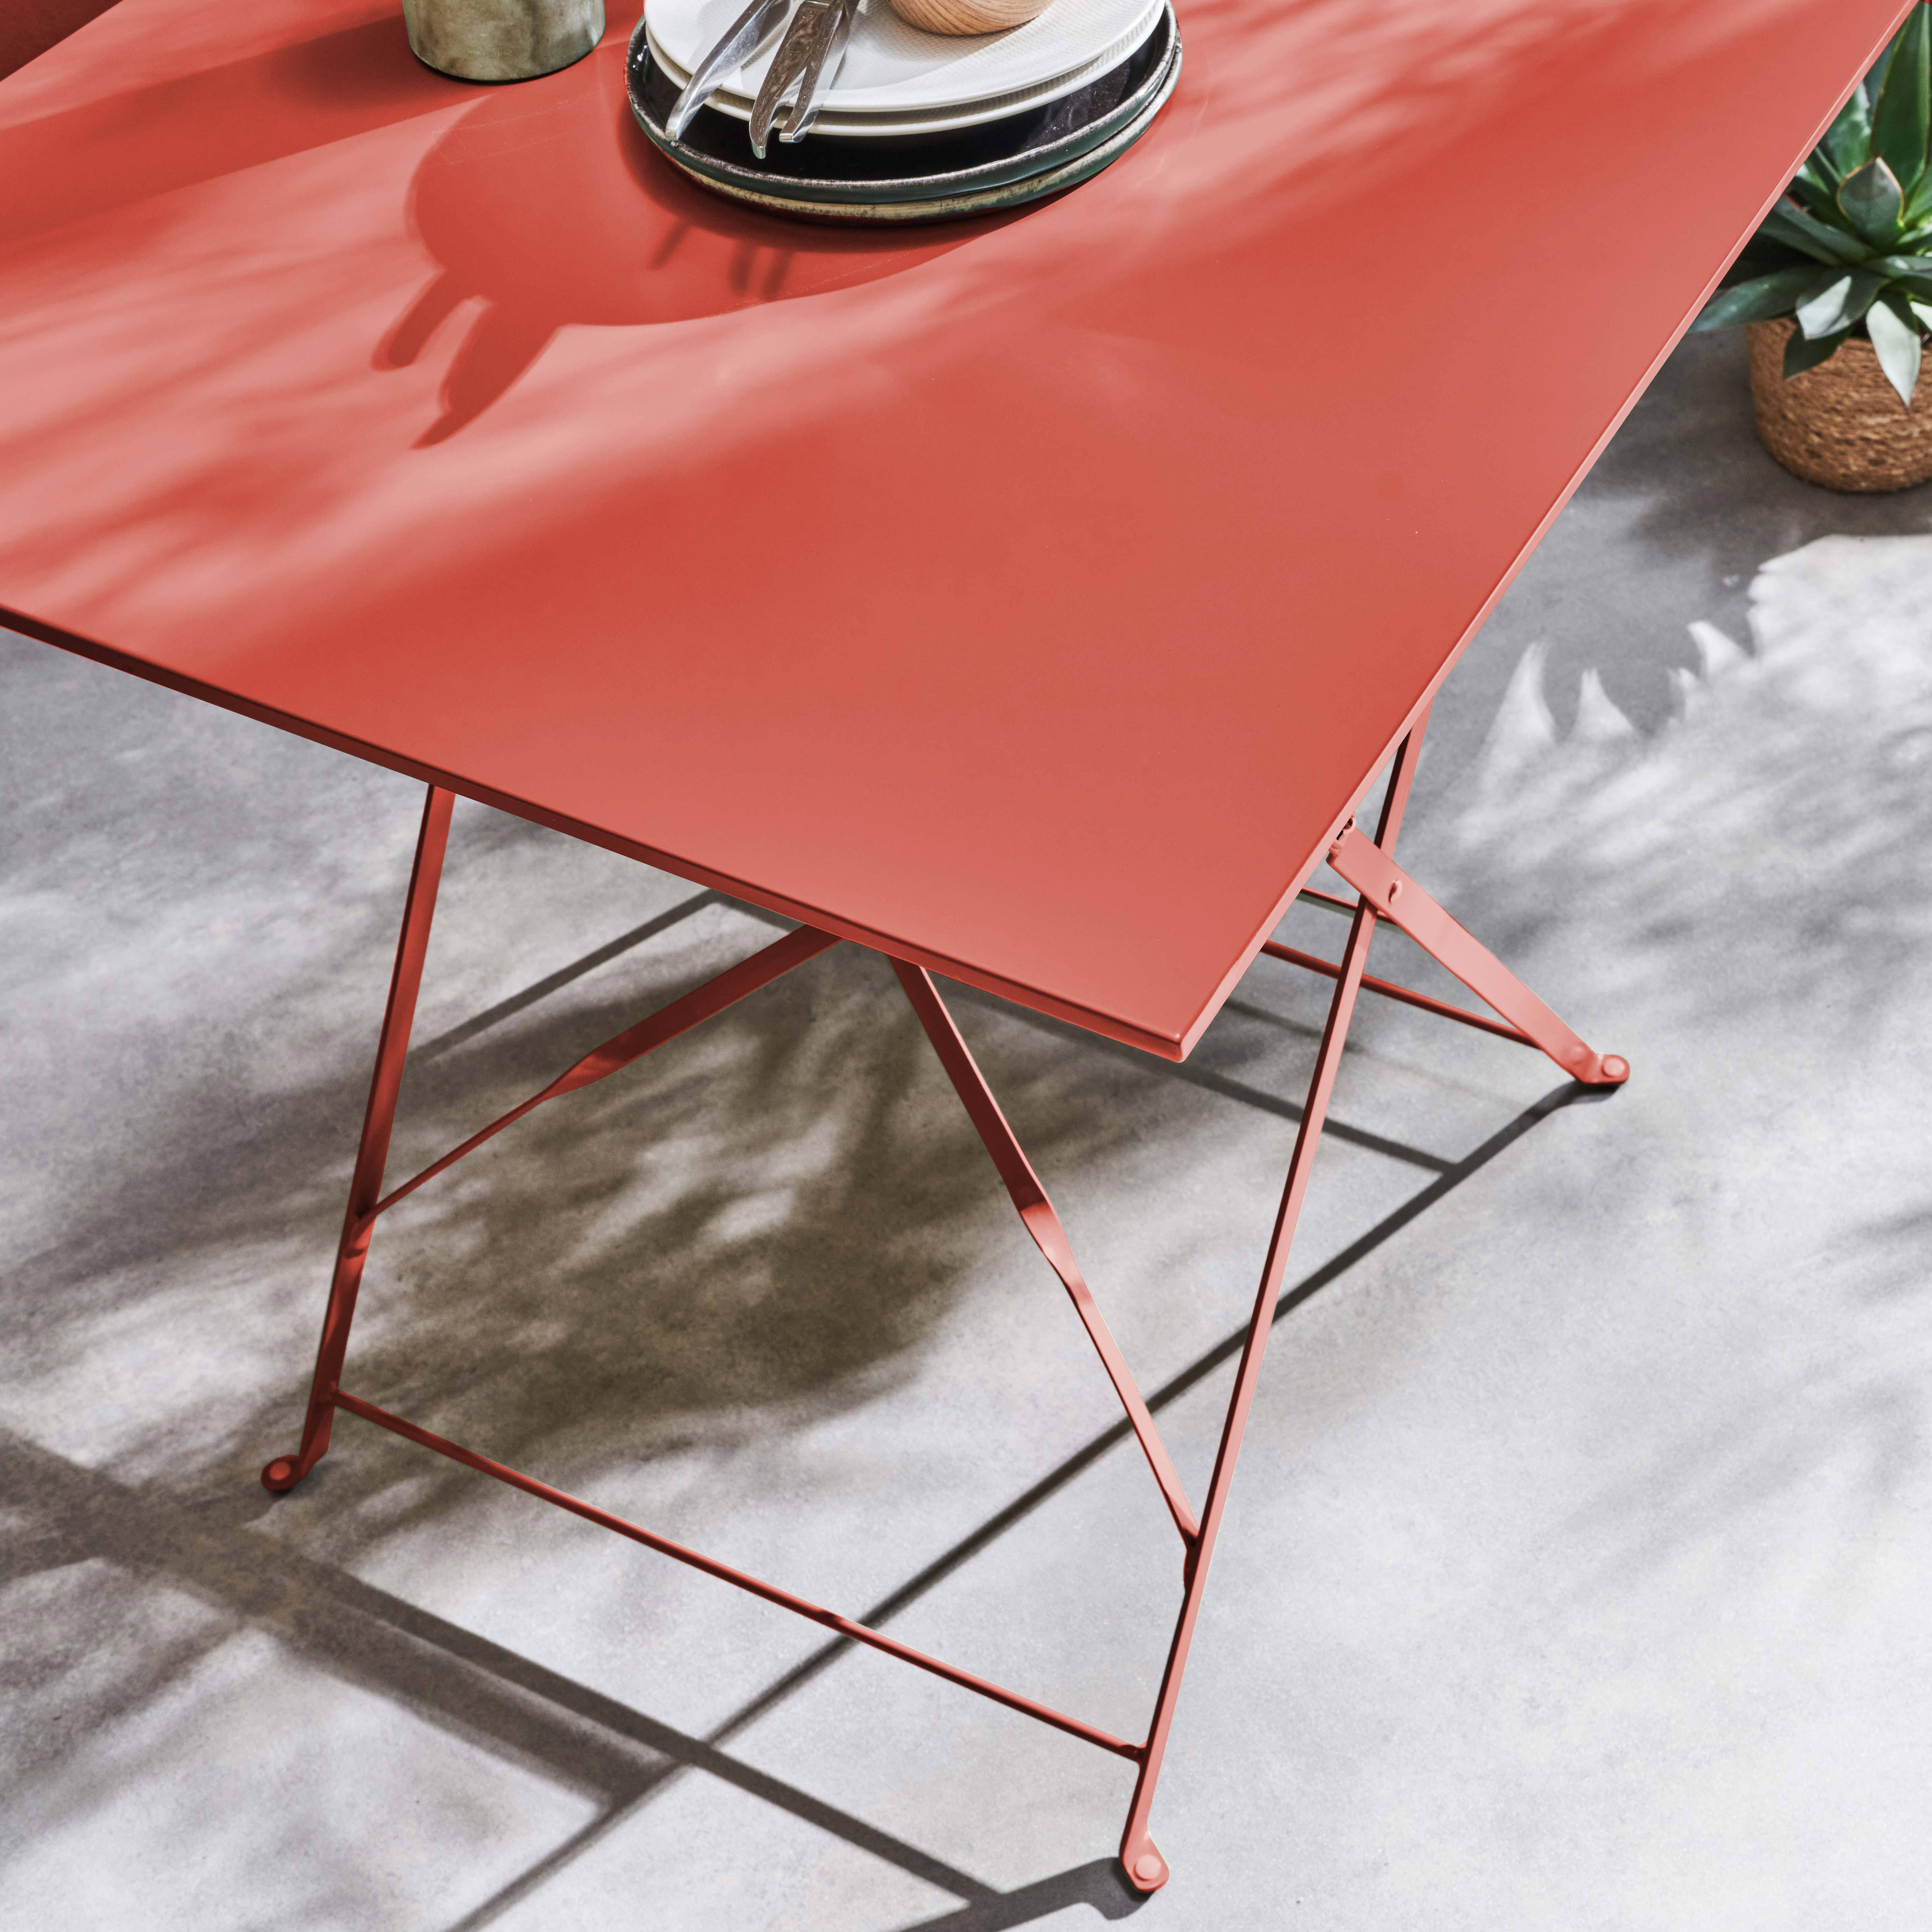 2-seater foldable thermo-lacquered steel bistro garden table, 70x70cm - Emilia - Terracotta,sweeek,Photo2